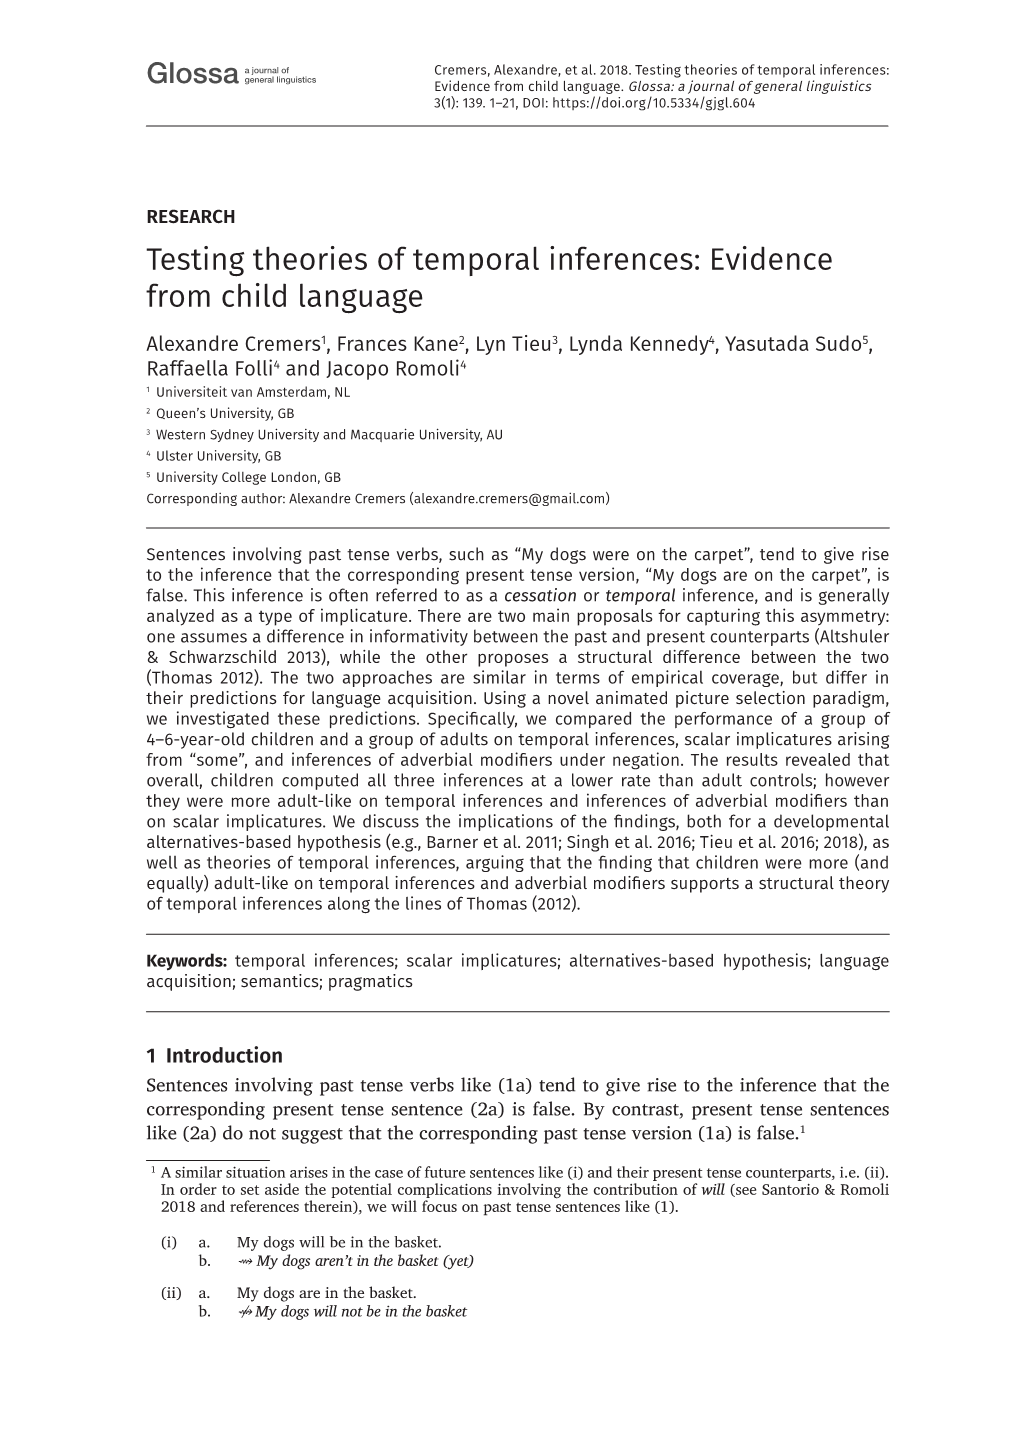 Testing Theories of Temporal Inferences: General Linguistics Glossa Evidence from Child Language